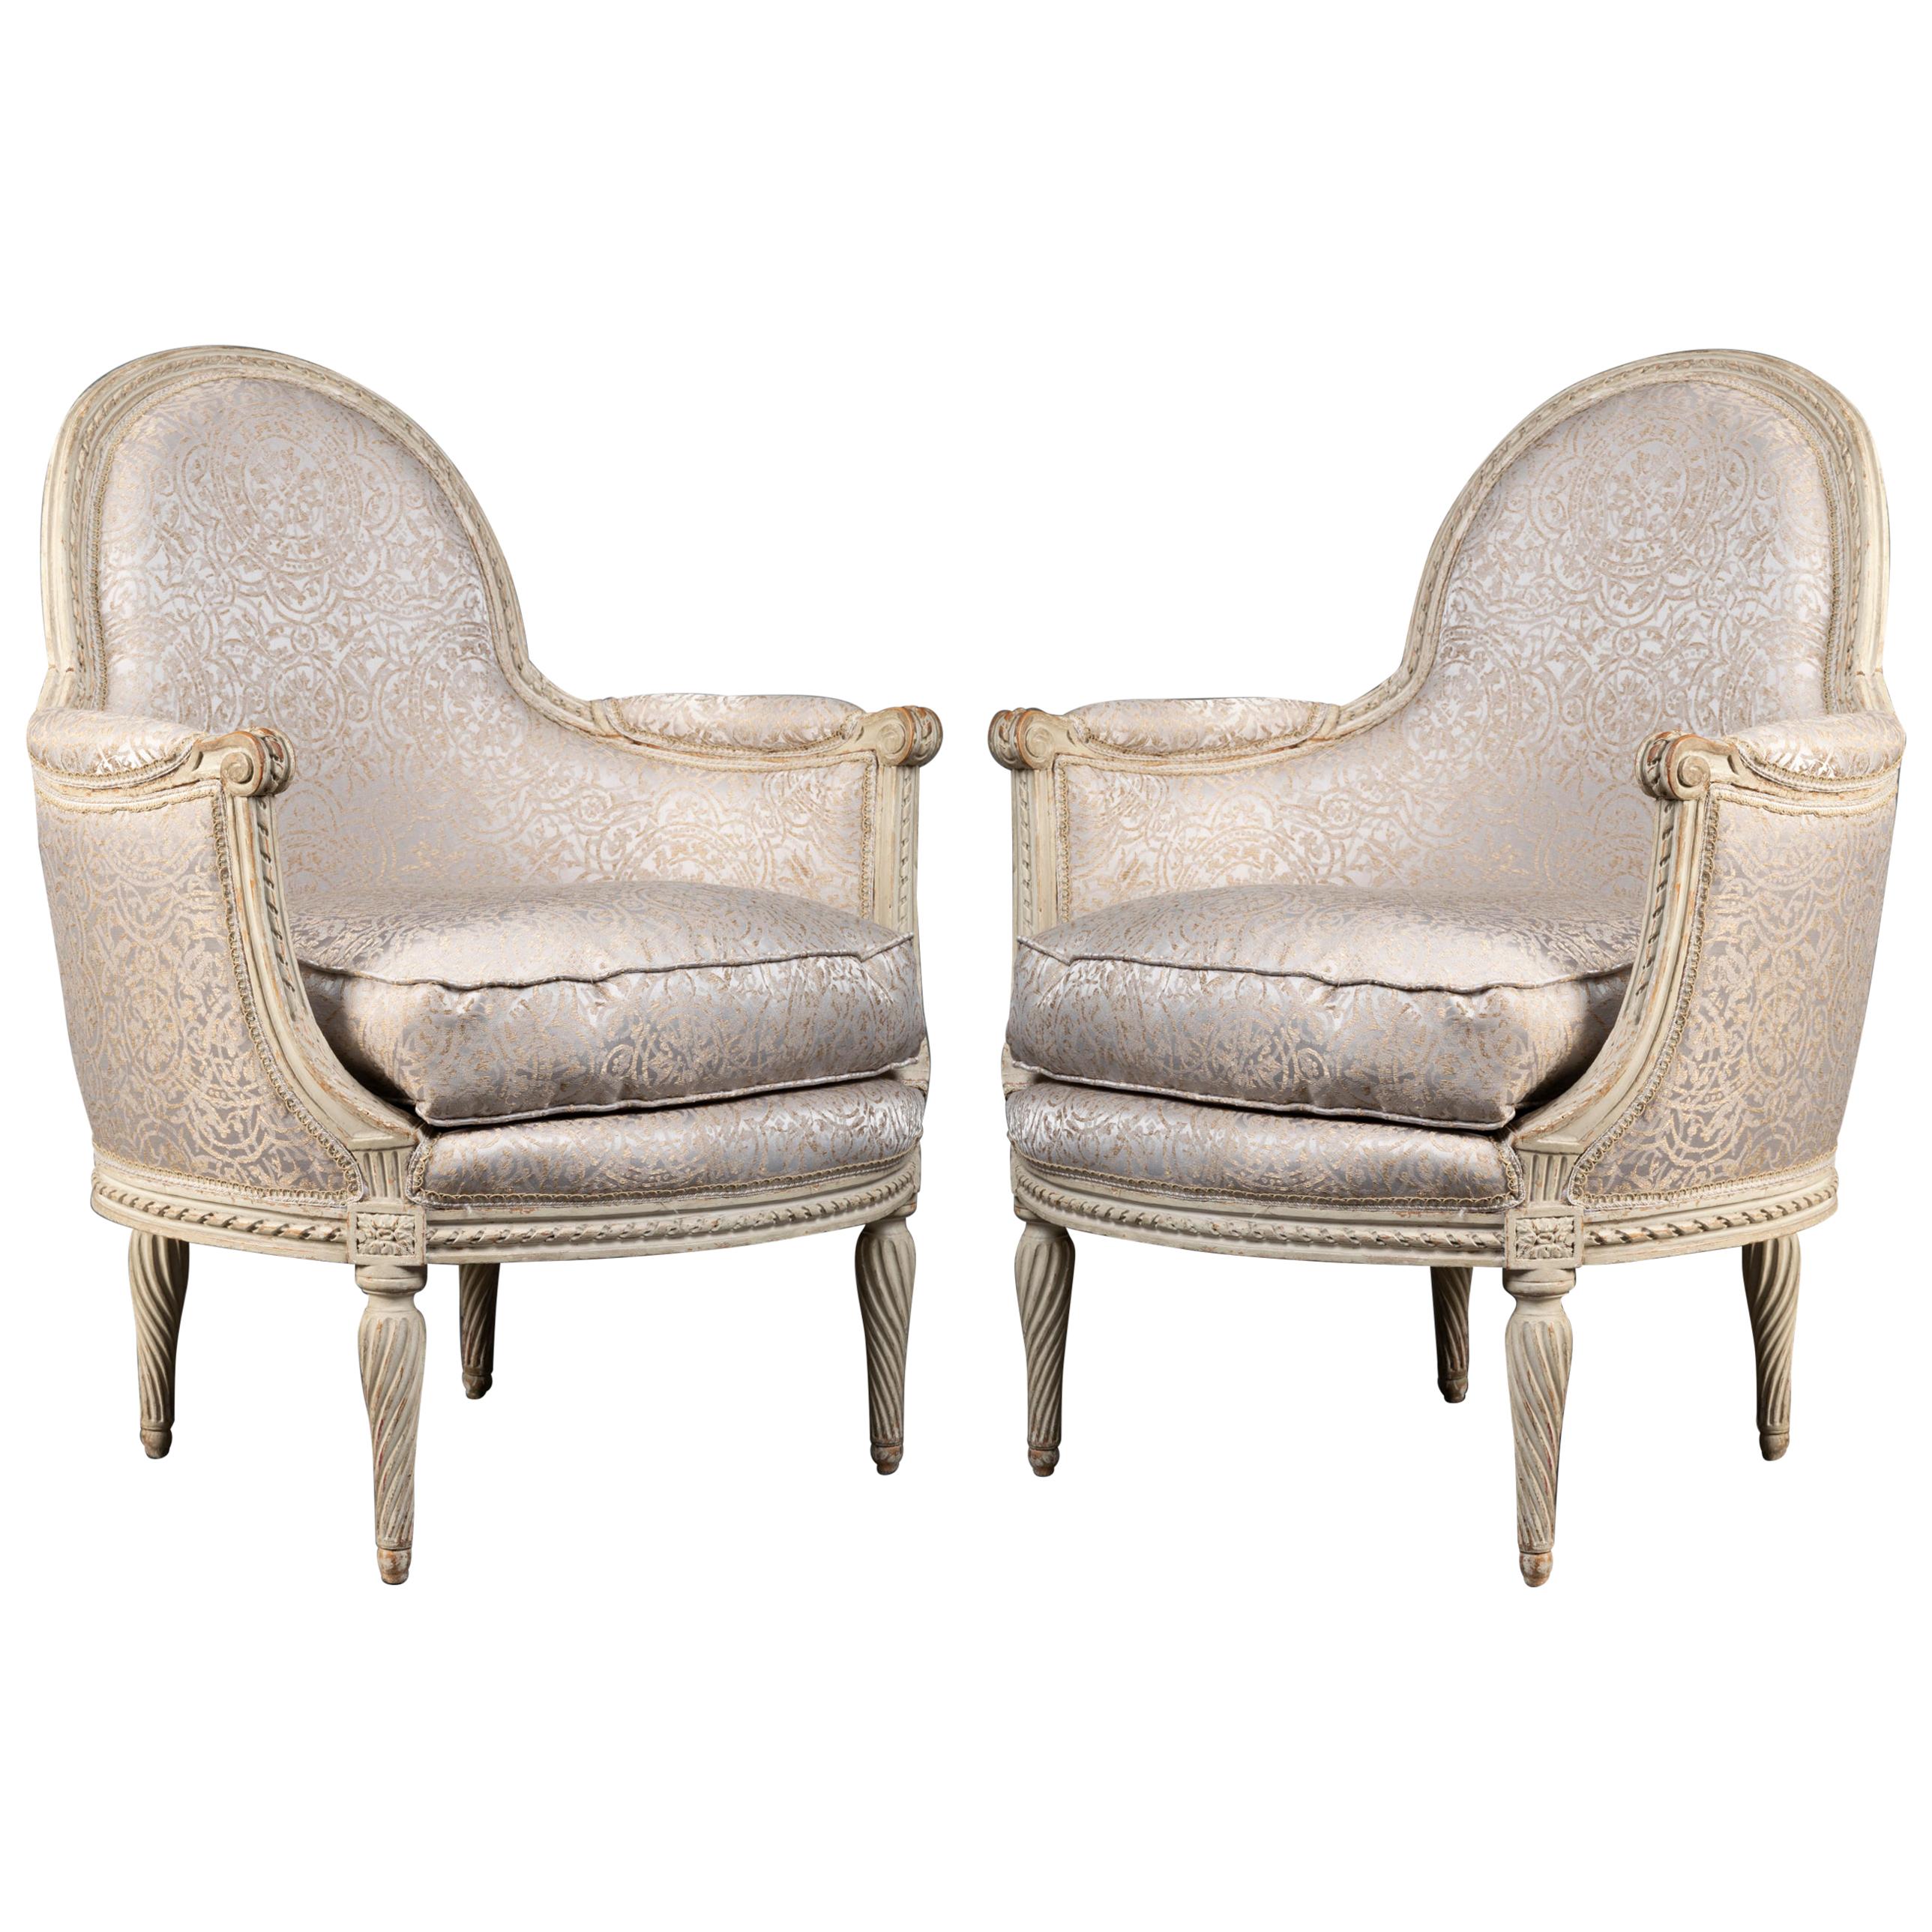 Pair of Bergère Chairs from the Louis XVI Period Stamped, Delanois, 18th Century For Sale